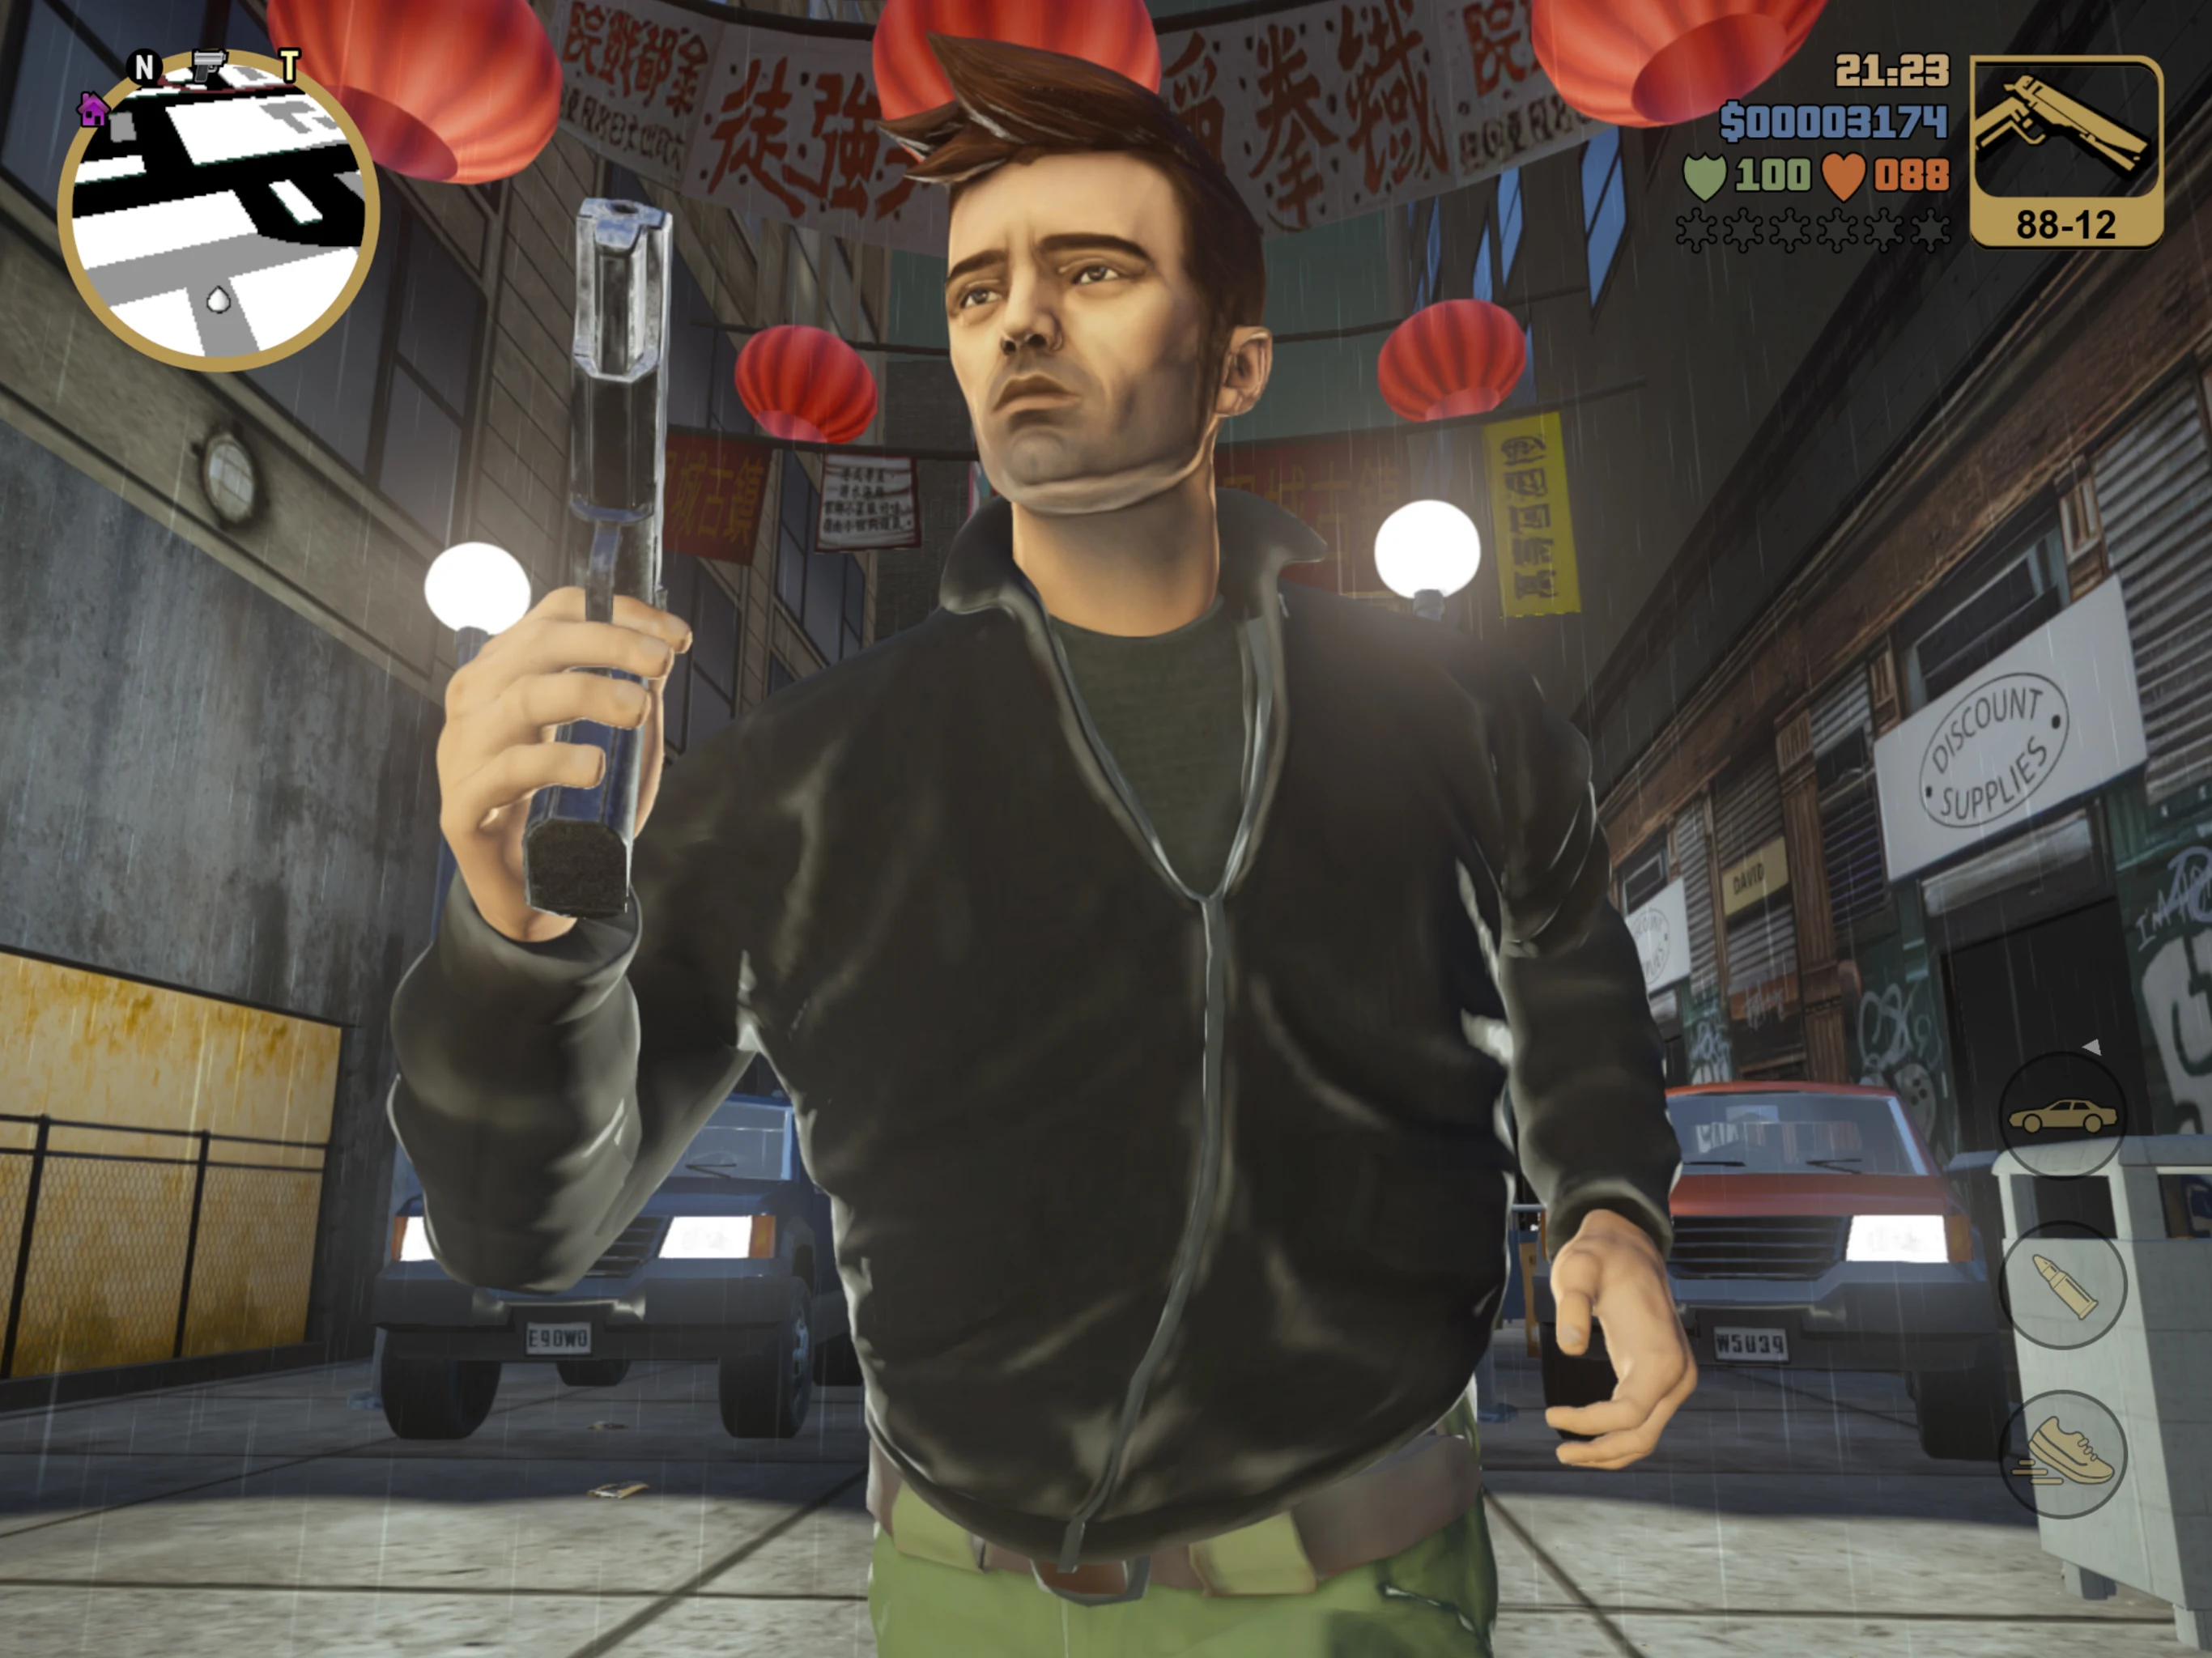 GTA Trilogy Remastered screenshots, gameplay leak is bad news for Grand  Theft Auto fans, Gaming, Entertainment